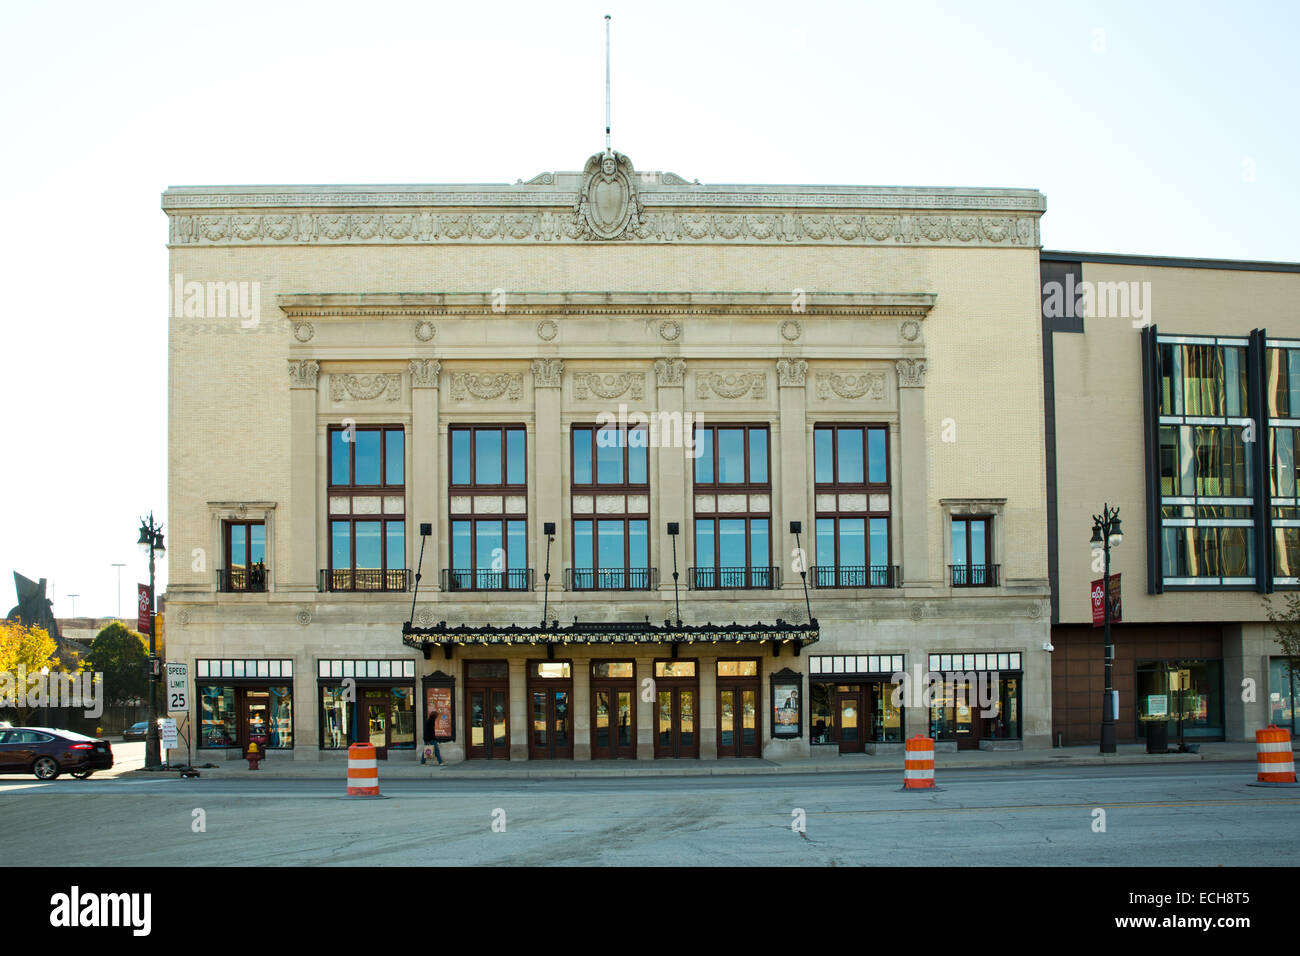 The Detroit Symphony Orchestra, Max M. Fisher Music Center, Detroit, Michigan, USA. Oct. 23, 2014. Stock Photo